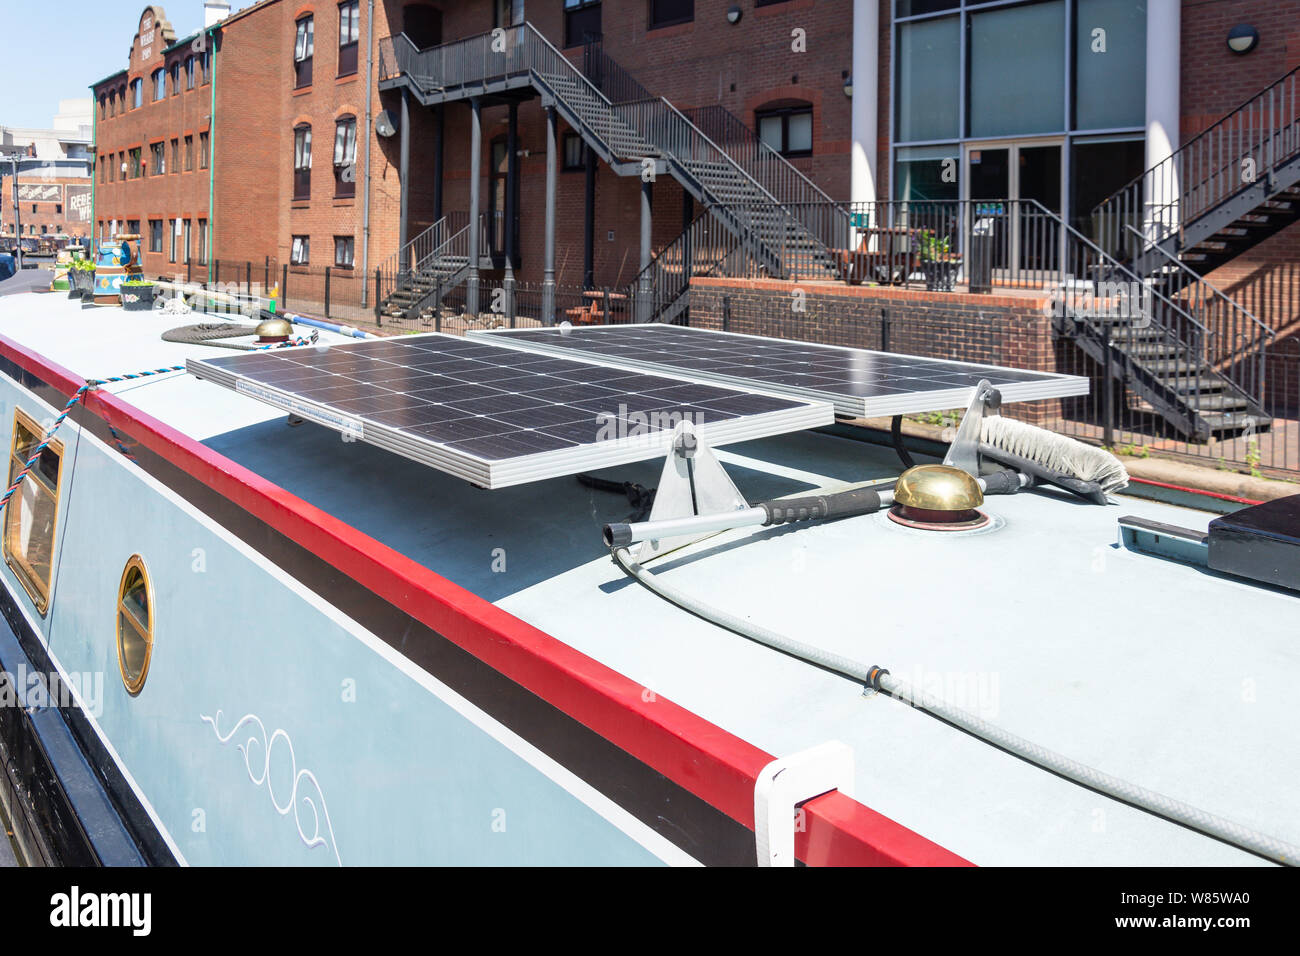 Solar panels on top of canal boat, The Worcester and Birmingham Canal, Gas Street Basin, Birmingham, West Midlands, England, United Kingdom Stock Photo